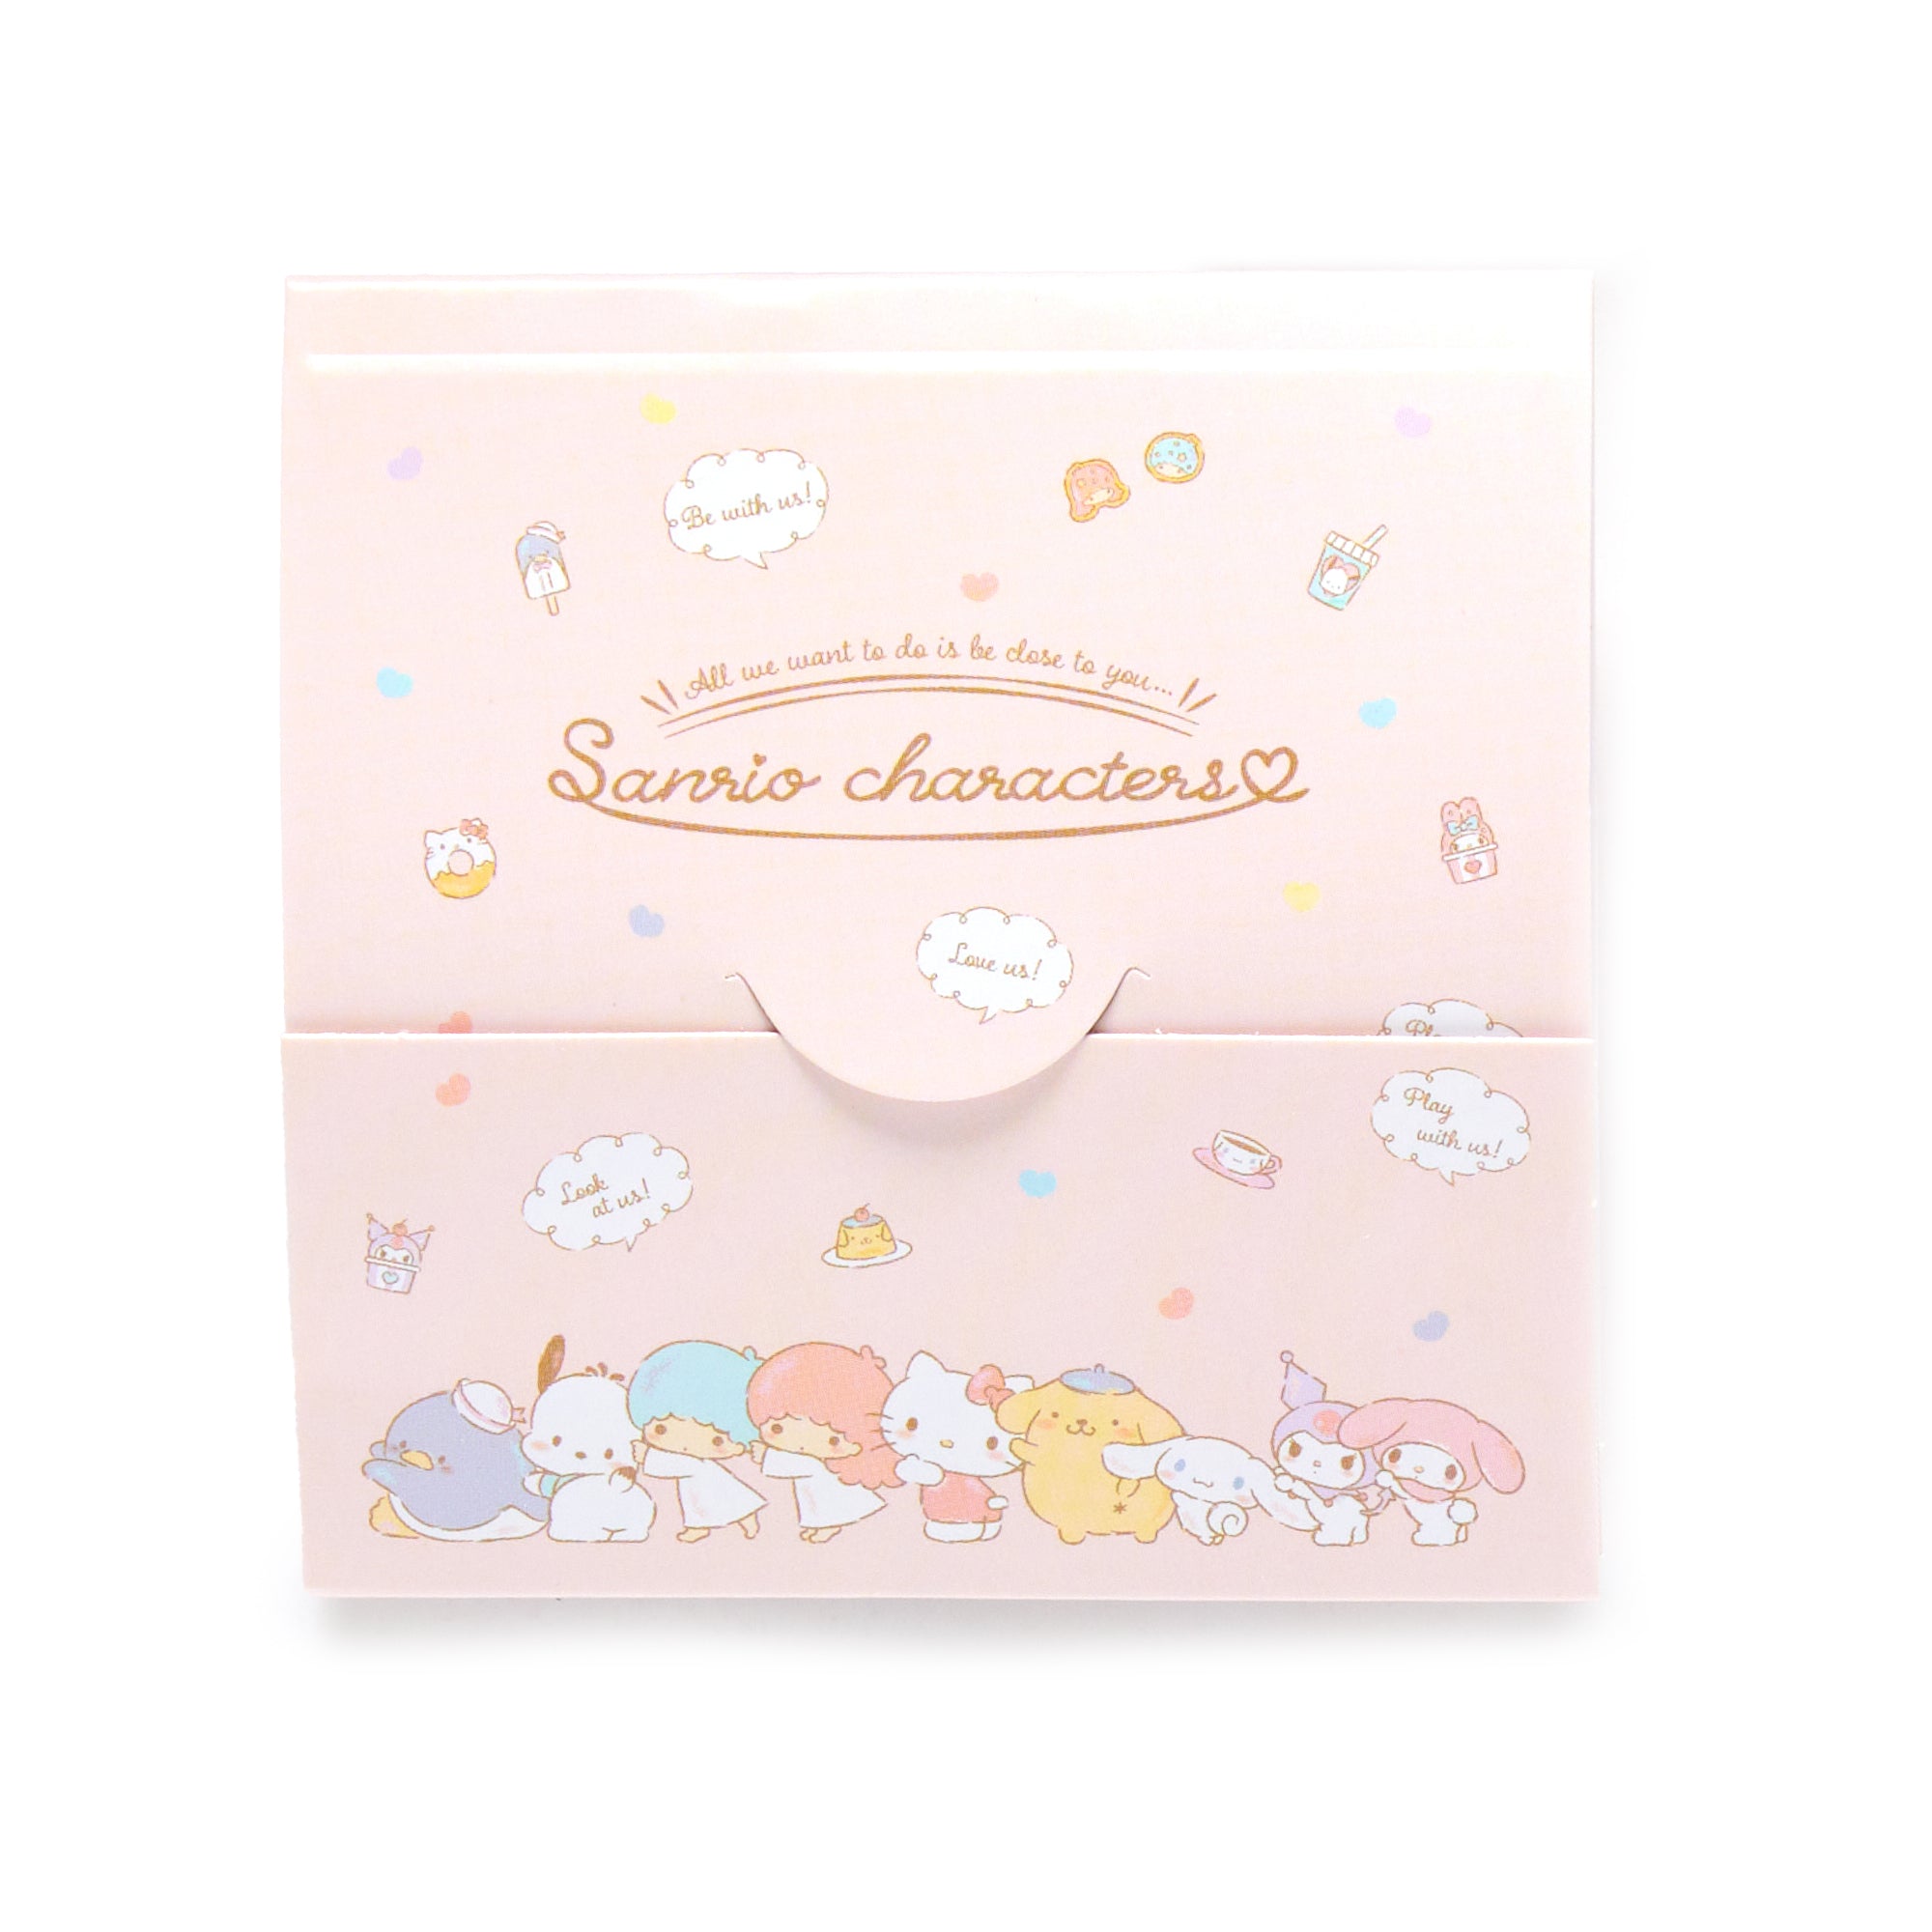 Sanrio Characters Page Marker Sticky Notes Stationery Japan Original   